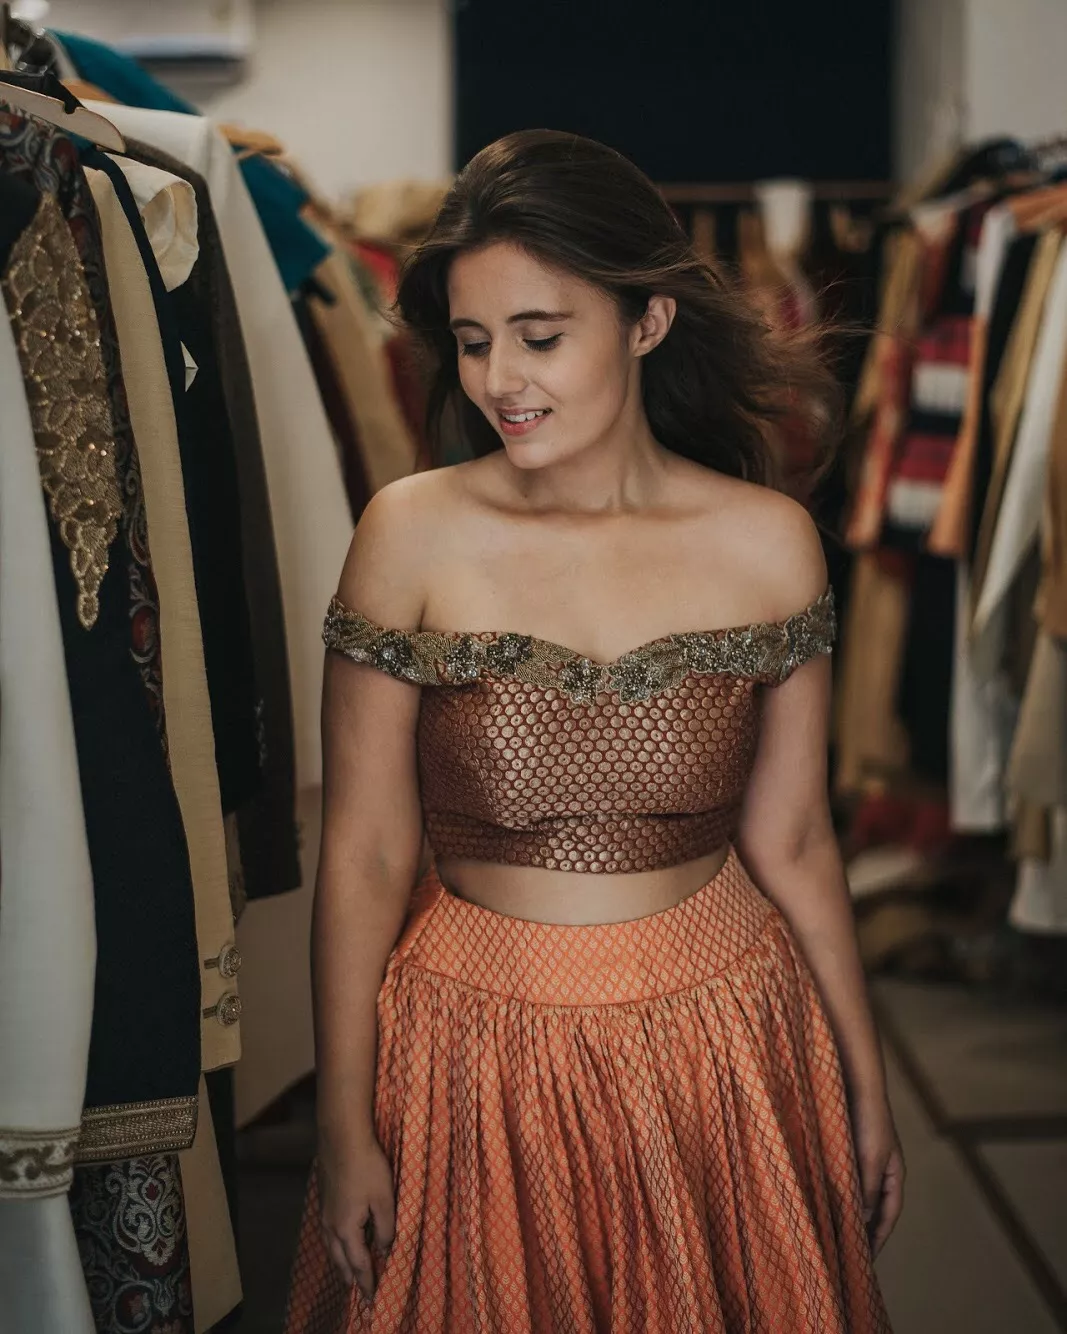 Wanna go off-the shoulder for this Diwali? Strapless bra is all you need